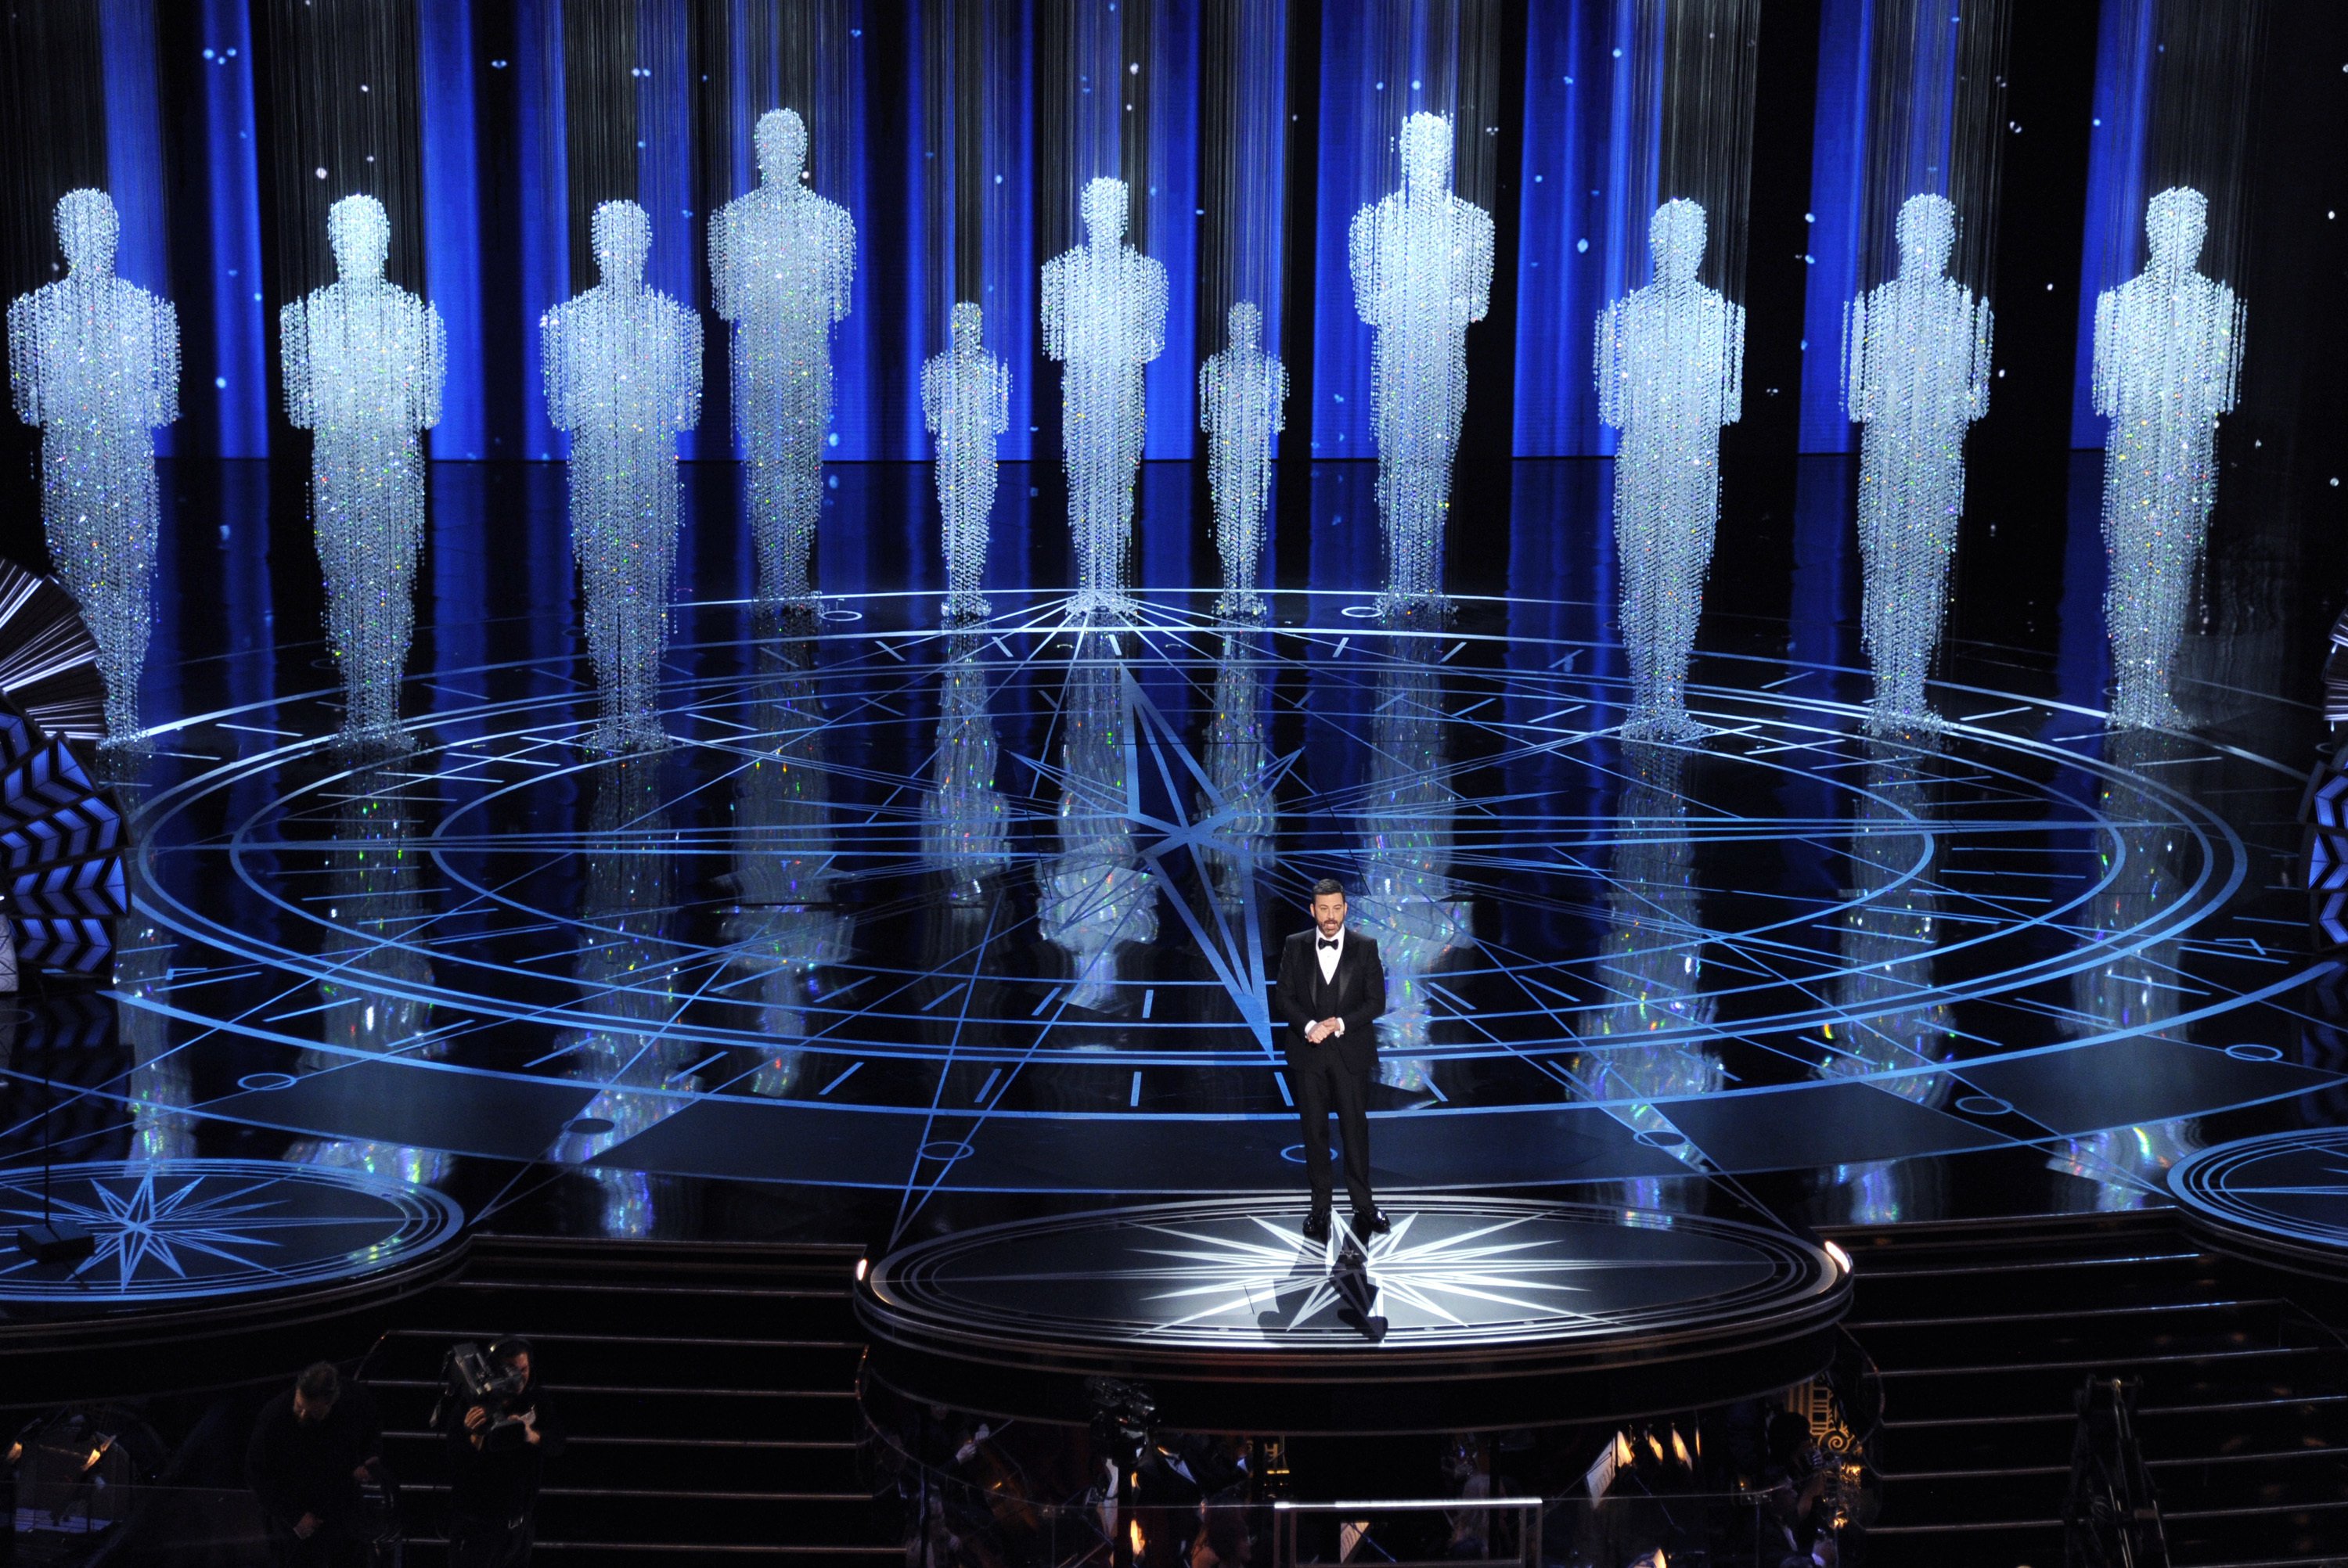 Will the Oscars be a “who cares” moment as ratings sink?